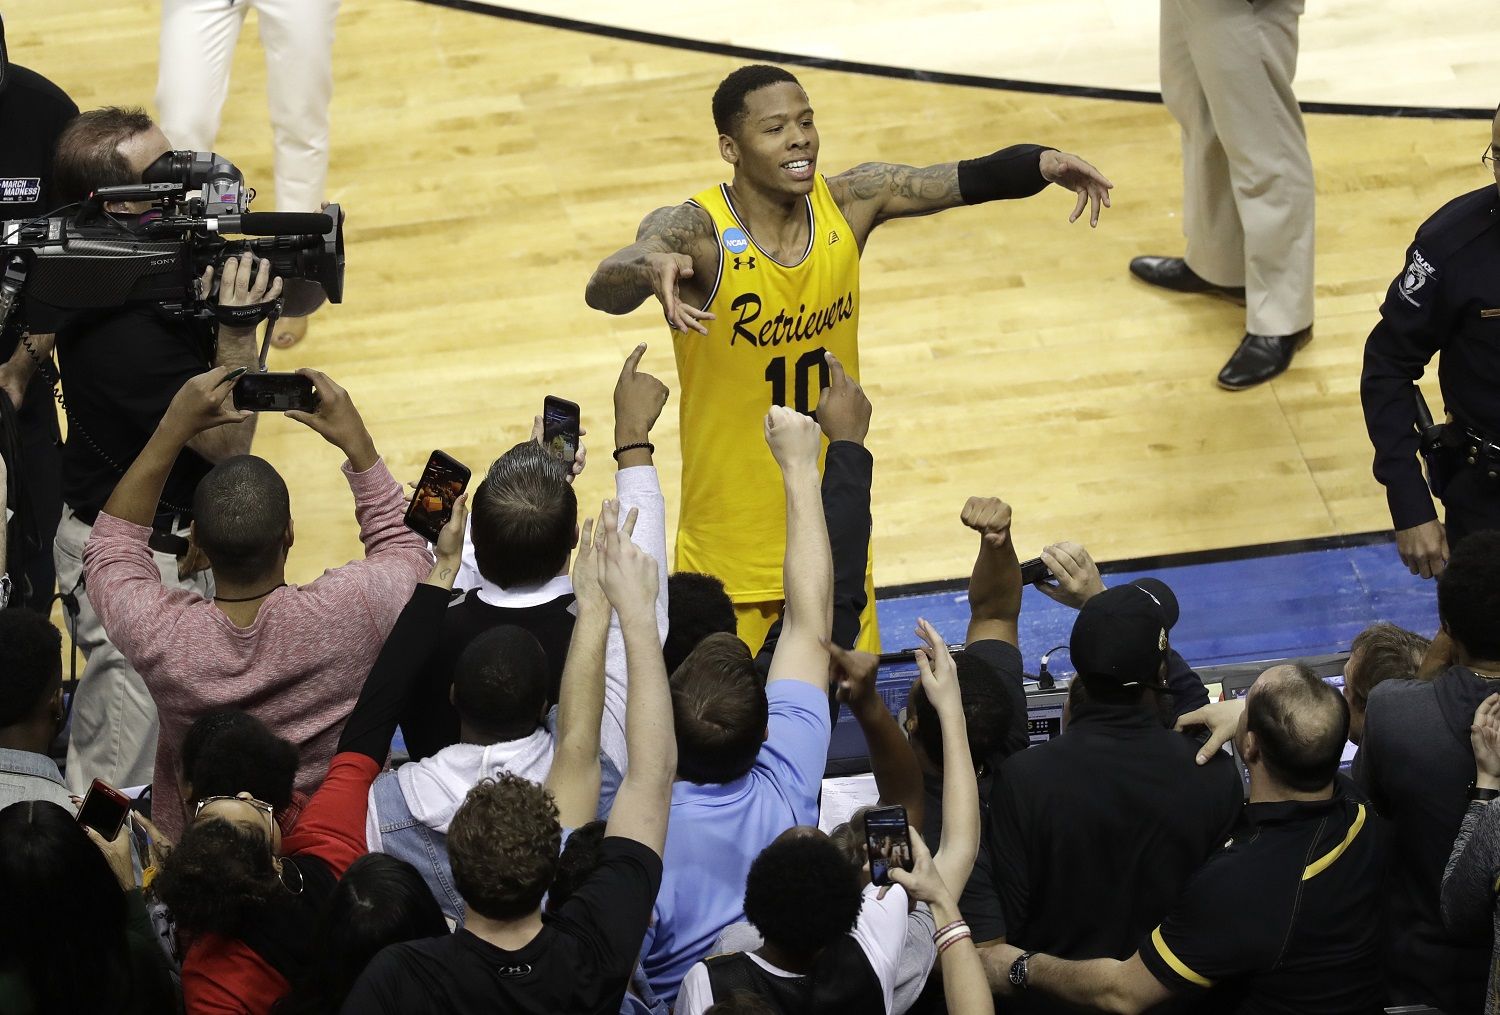 UMBC's Jairus Lyles (10) celebrates with fans after the team's 74-54 win over Virginia in a first-round game in the NCAA men's college basketball tournament in Charlotte, N.C., Friday, March 16, 2018. (AP Photo/Chuck Burton)